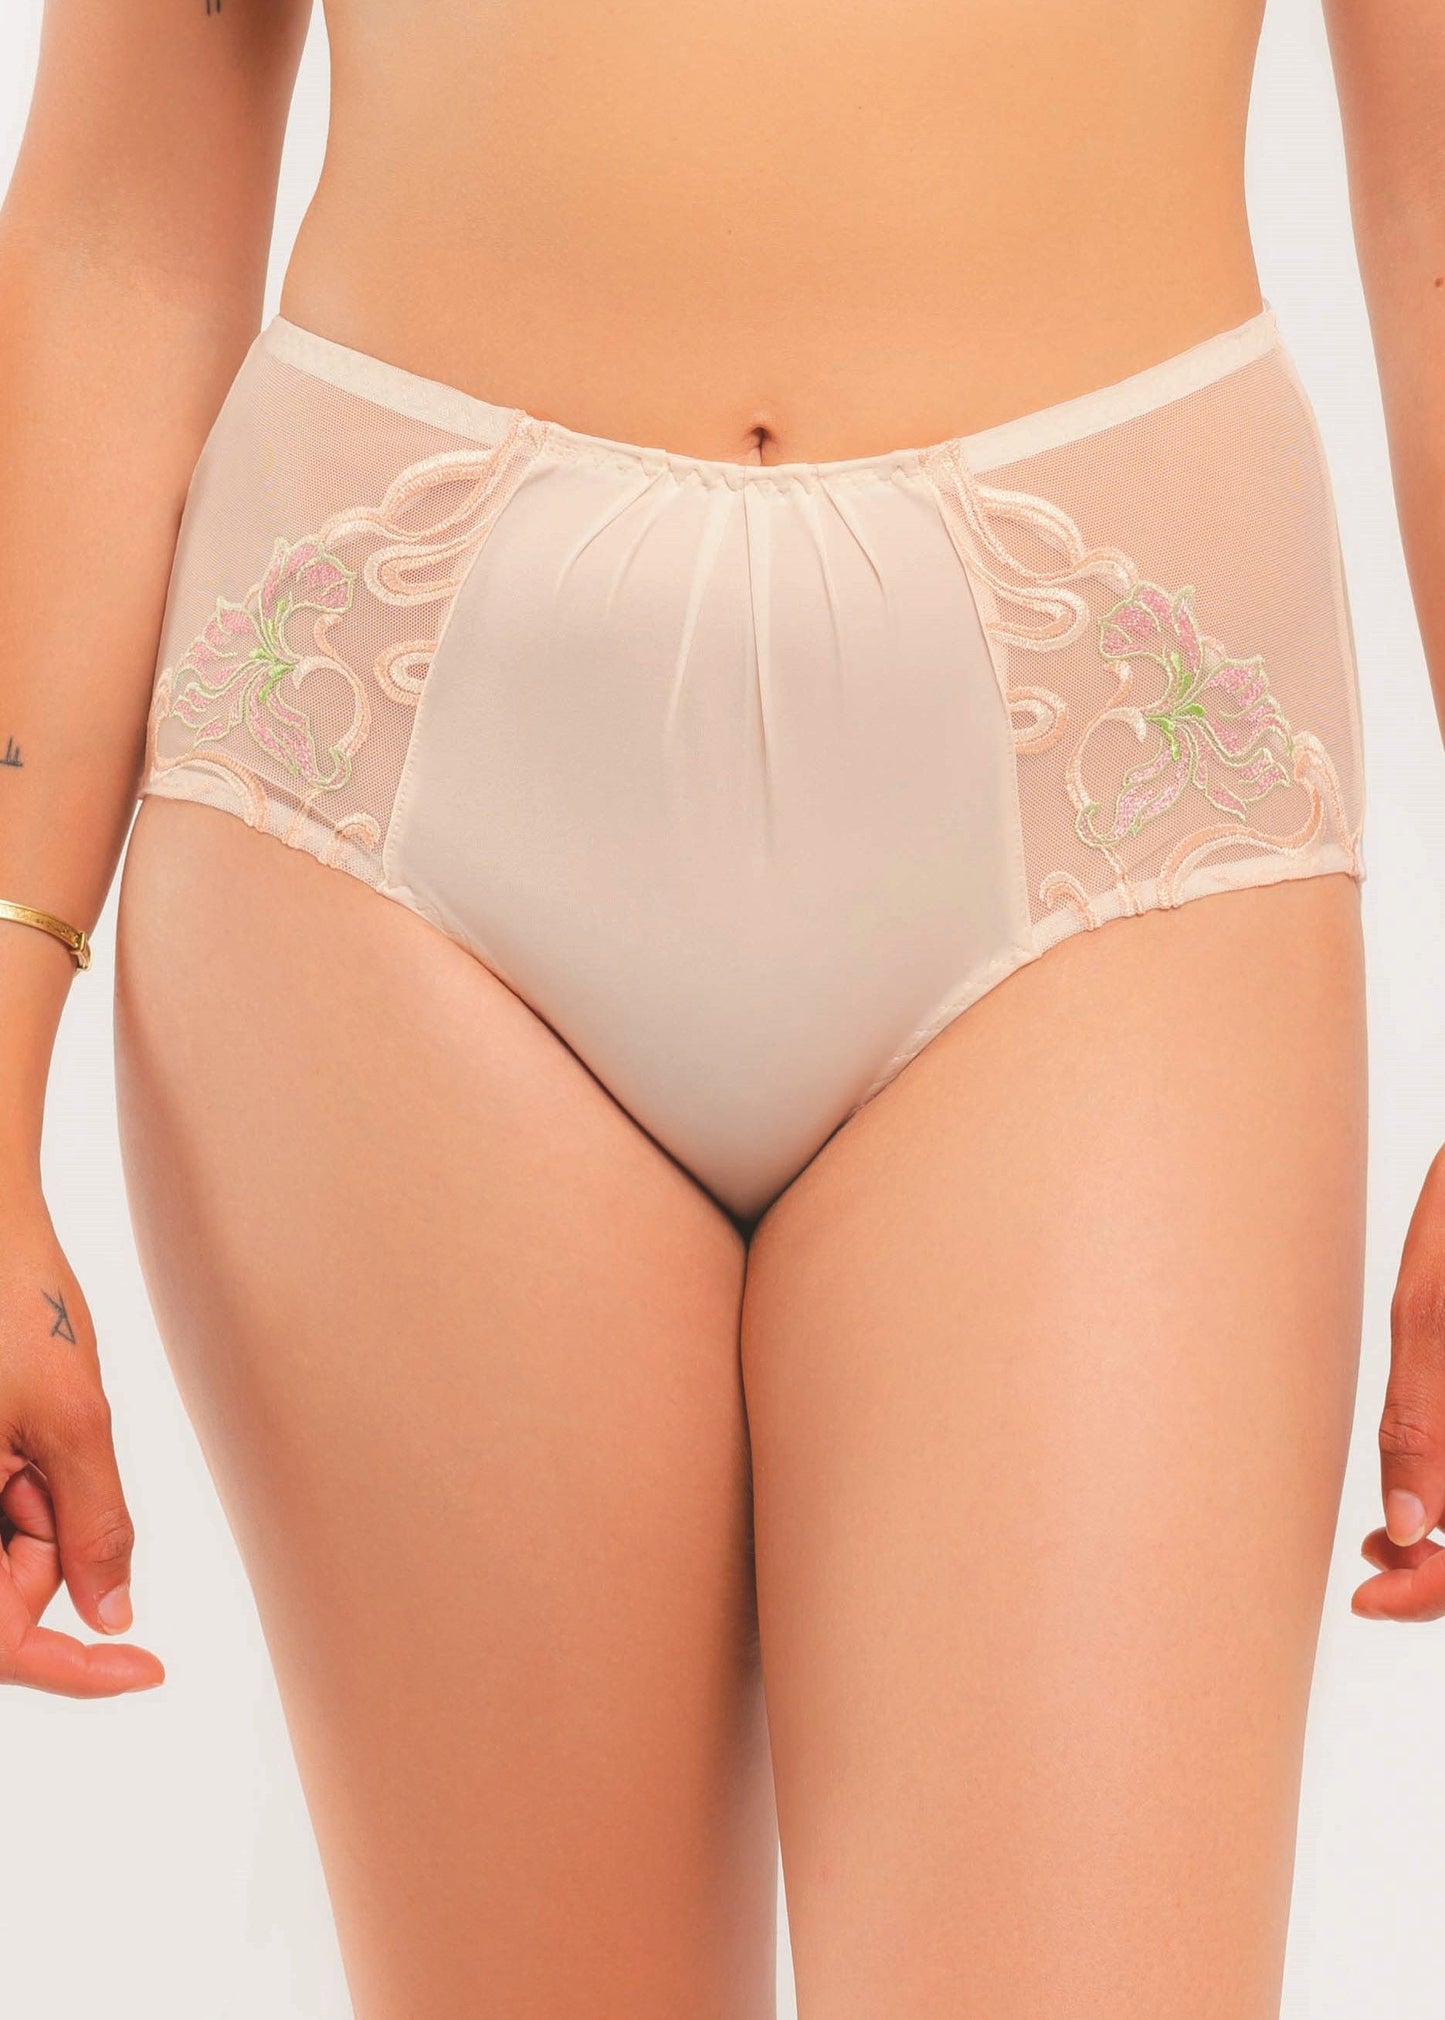 he Horta line's full brief is inspired by the varied architecture of Victor Horta, a renowned Belgian architect renowned for his involvement in the Art Nouveau movement in Belgium.